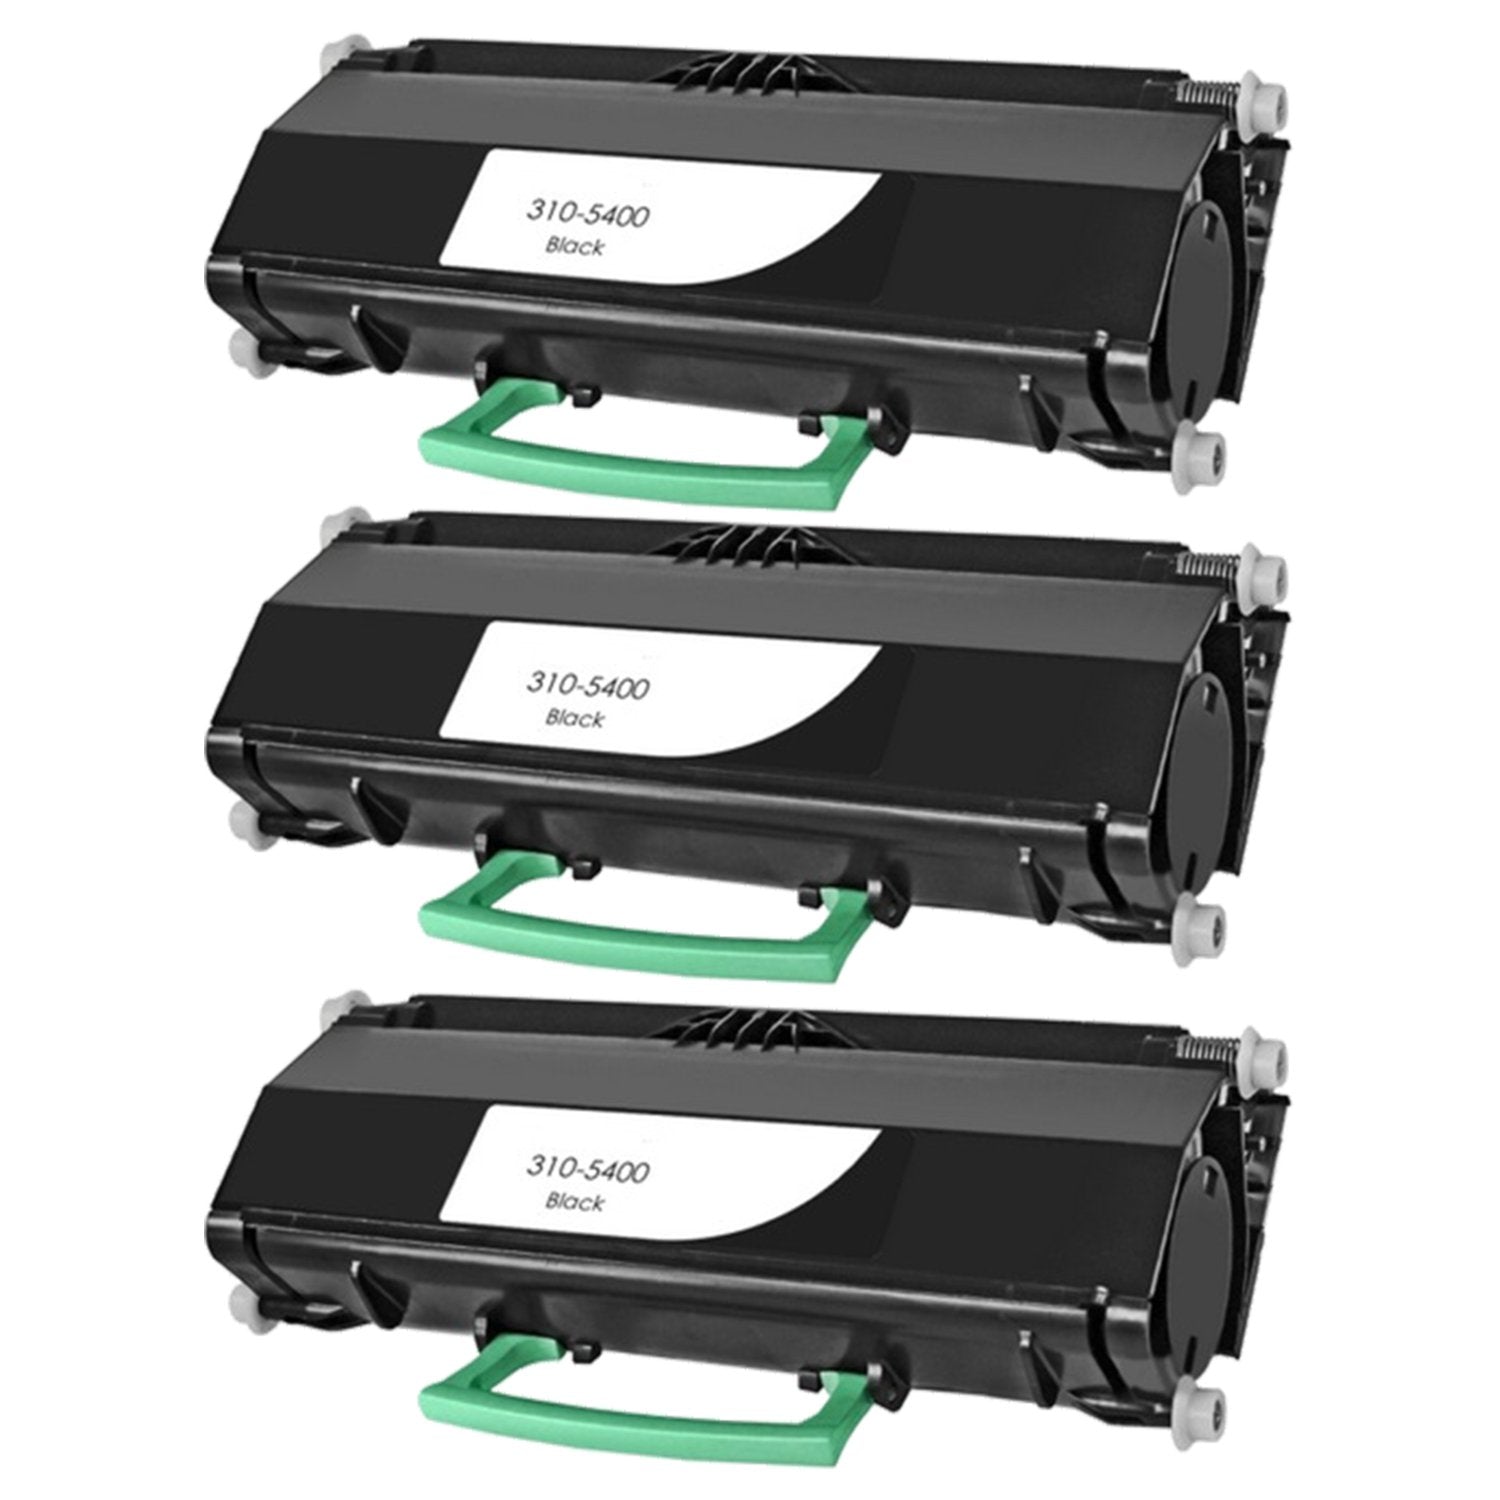 Absolute Toner Compatible Dell 310-5400 High Yield Black Toner Cartridge | Absolute Toner Dell Toner Cartridges